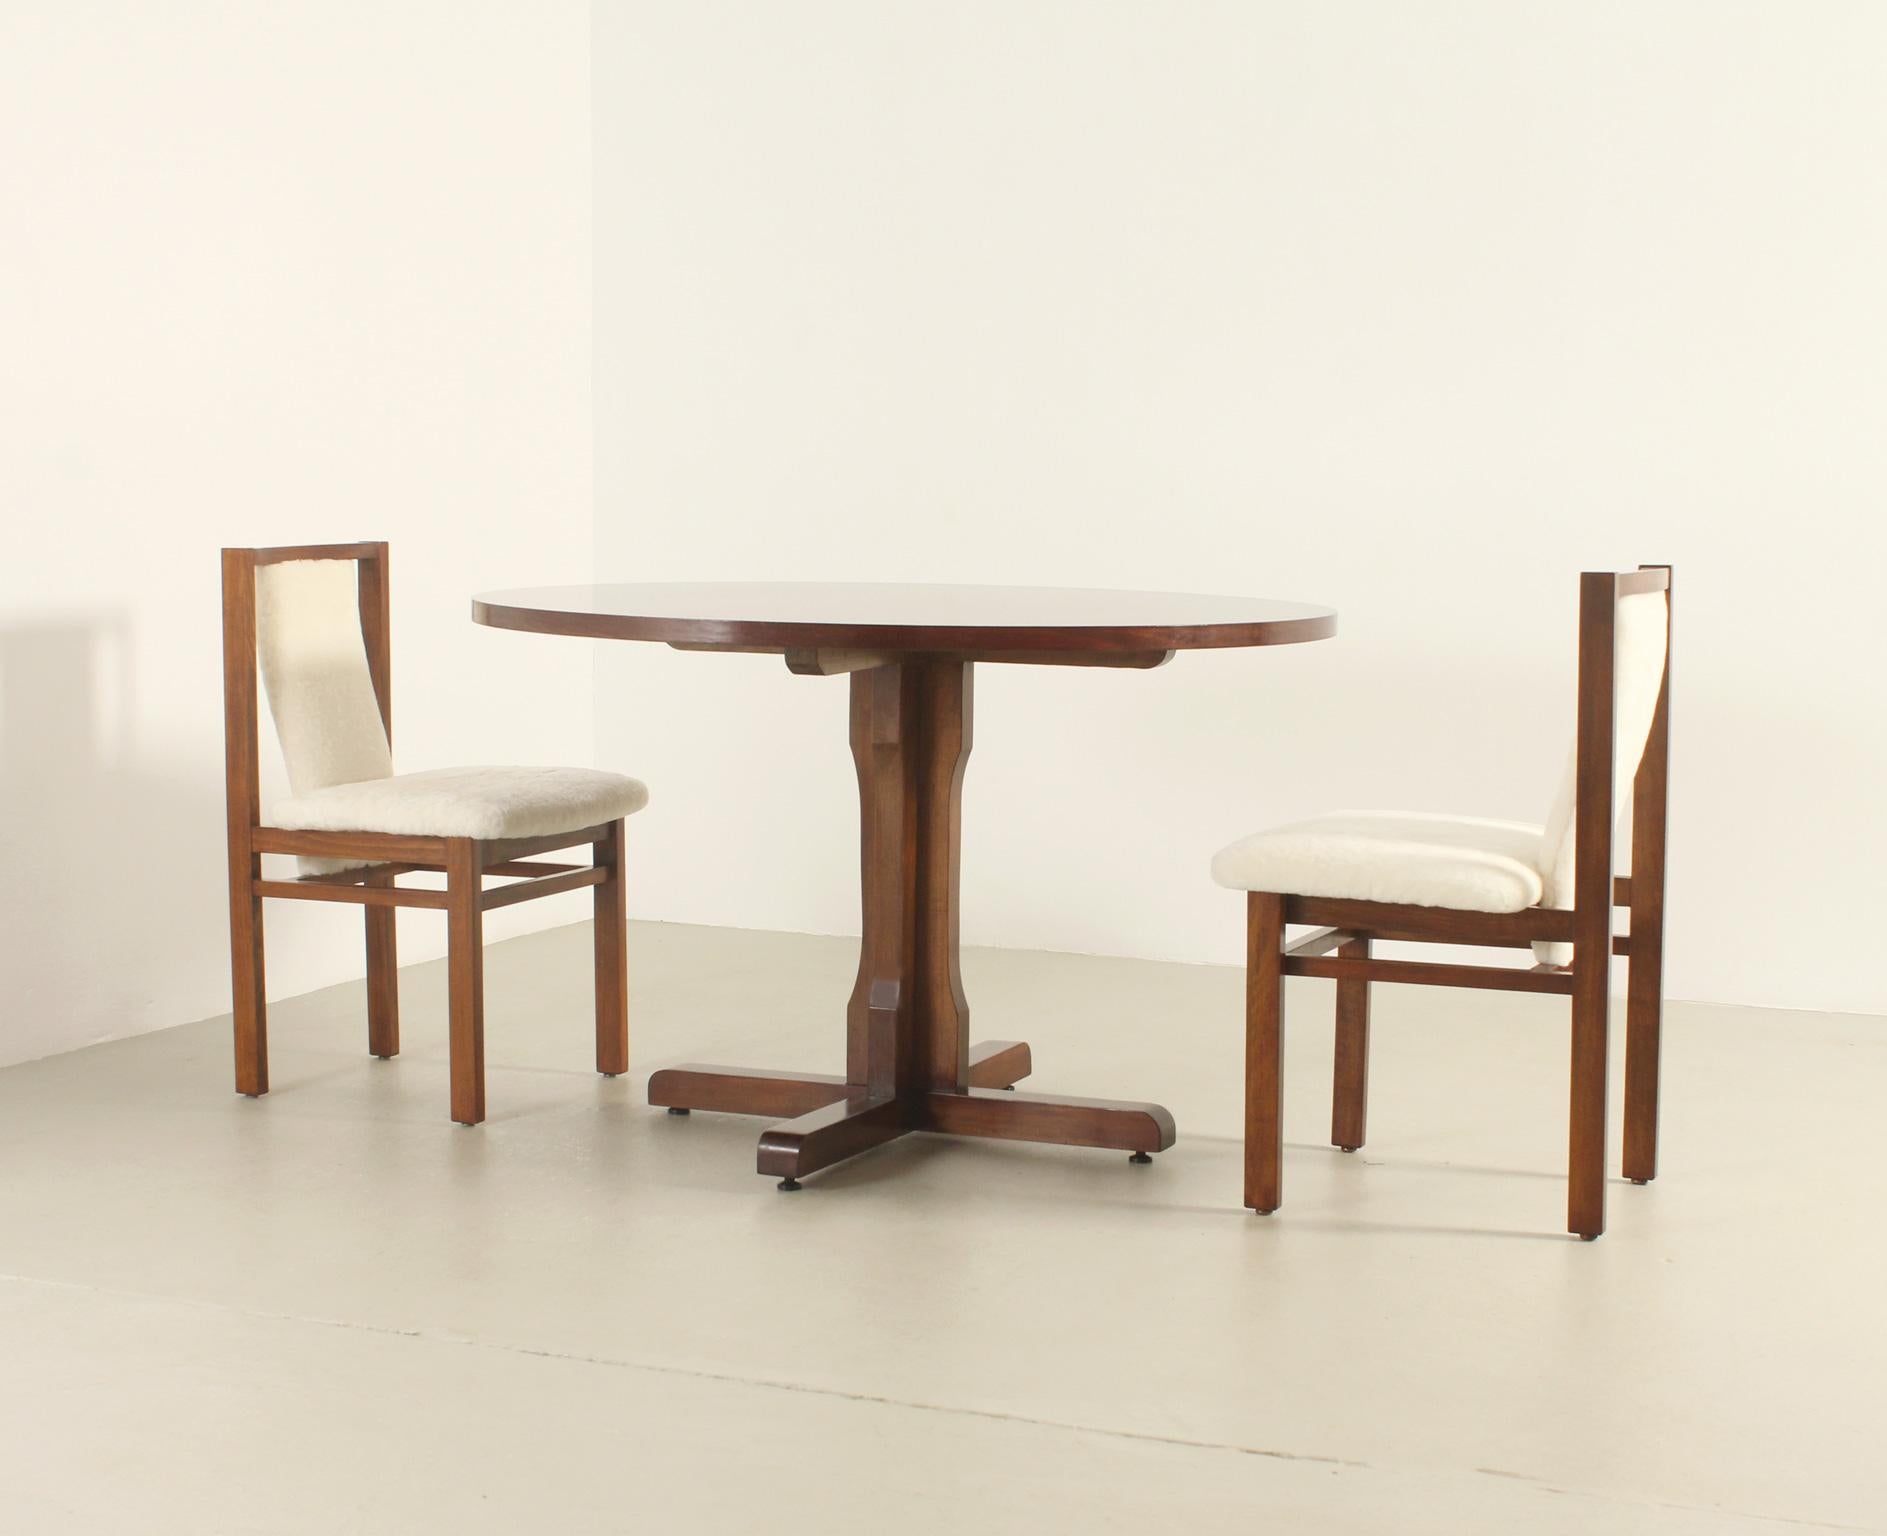 Mid-20th Century Round Dining Table in Walnut Wood by Jordi Vilanova, Spain, 1960's For Sale